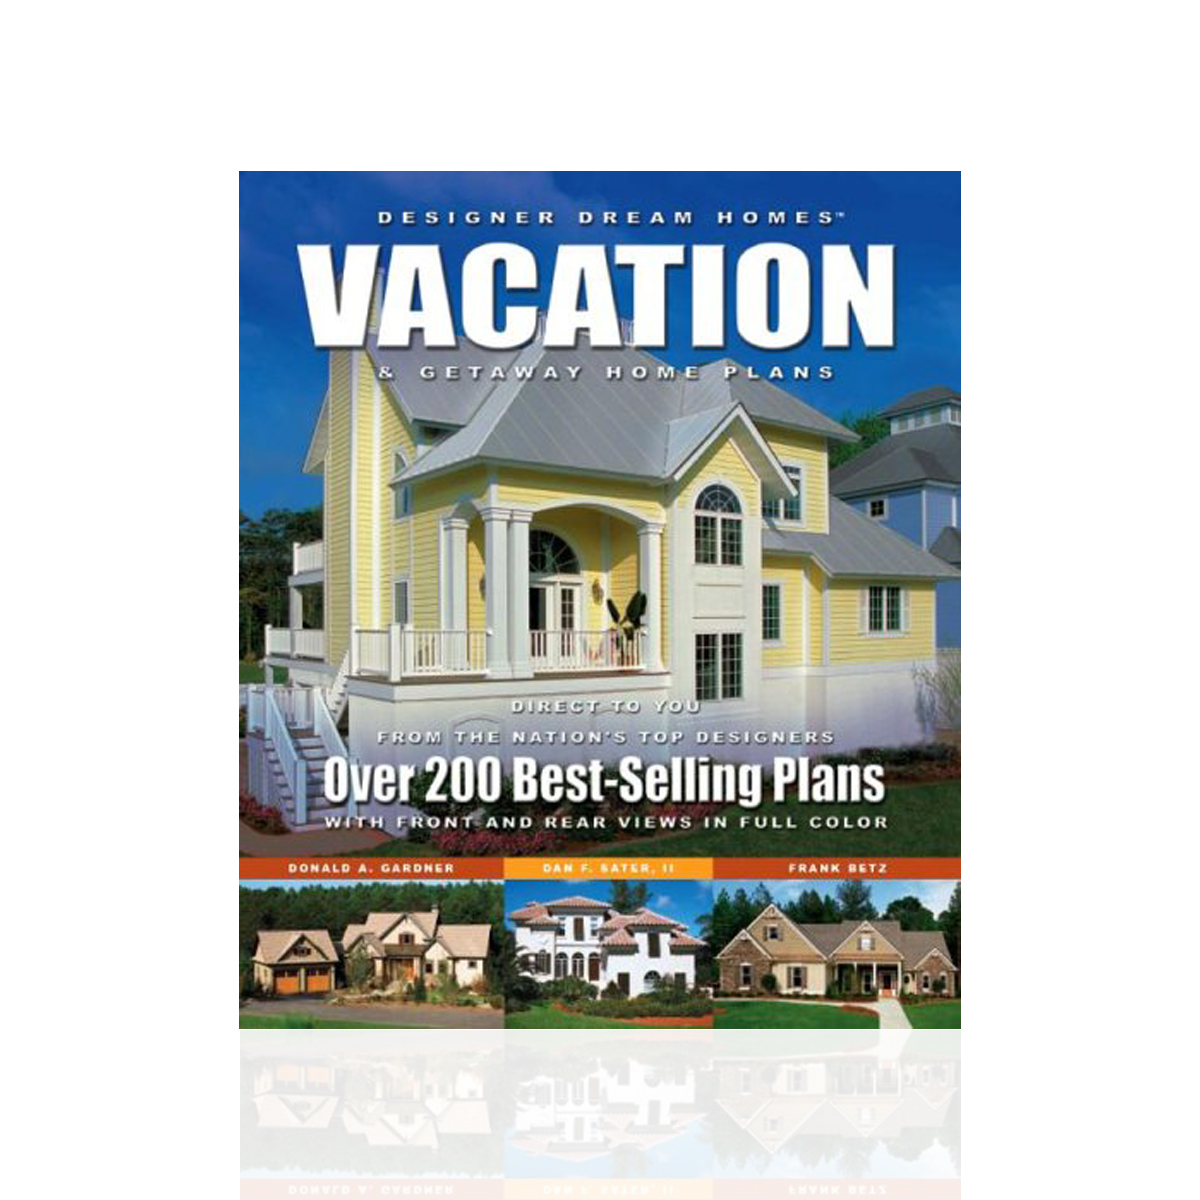 Designer Dream Homes Vacation and Getaway Home Plans